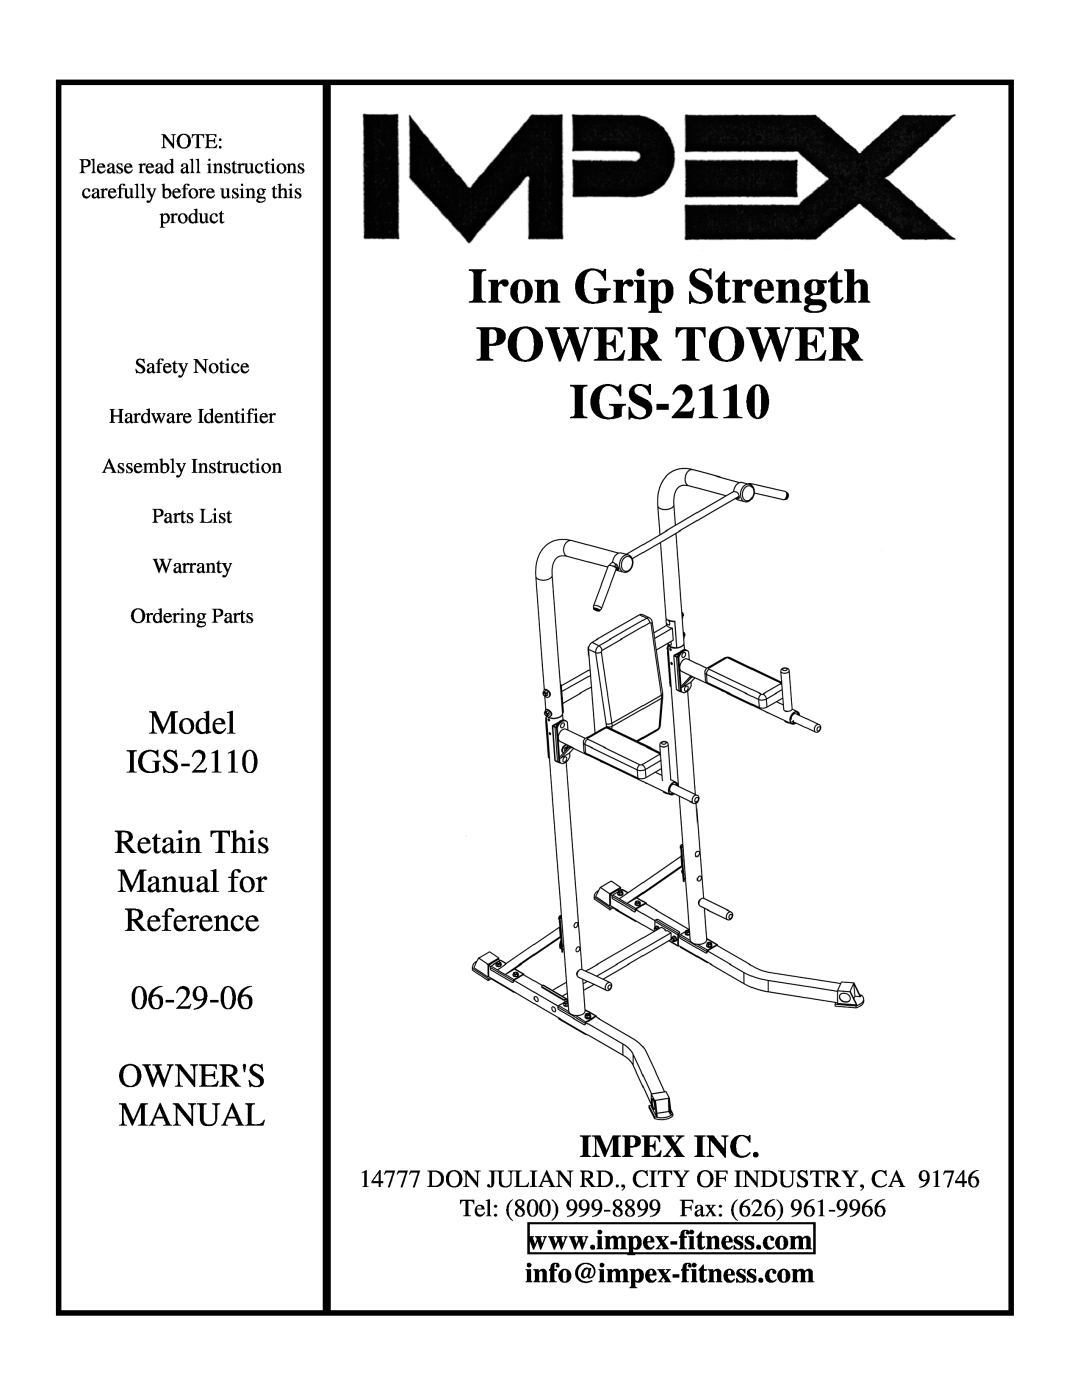 Impex manual Iron Grip Strength POWER TOWER IGS-2110, Model IGS-2110 Retain This Manual for Reference 06-29-06 OWNERS 